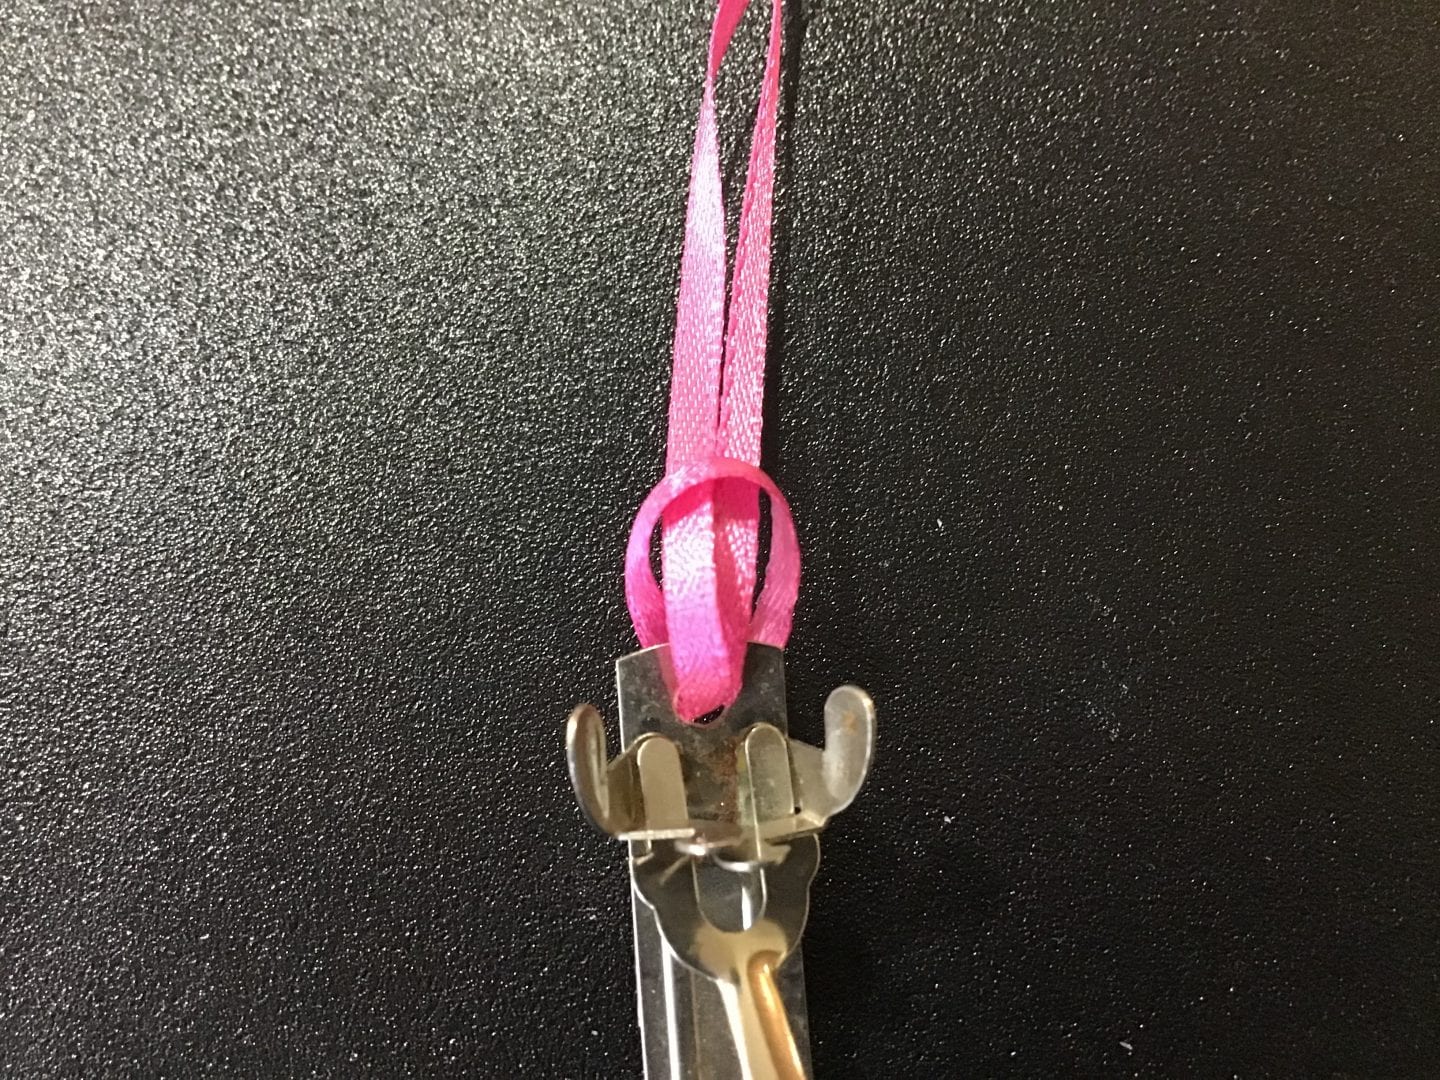 the two ends of the pink ribbon inserted through the open hole in the barrette and pulled through the loop at the other end of the ribbon